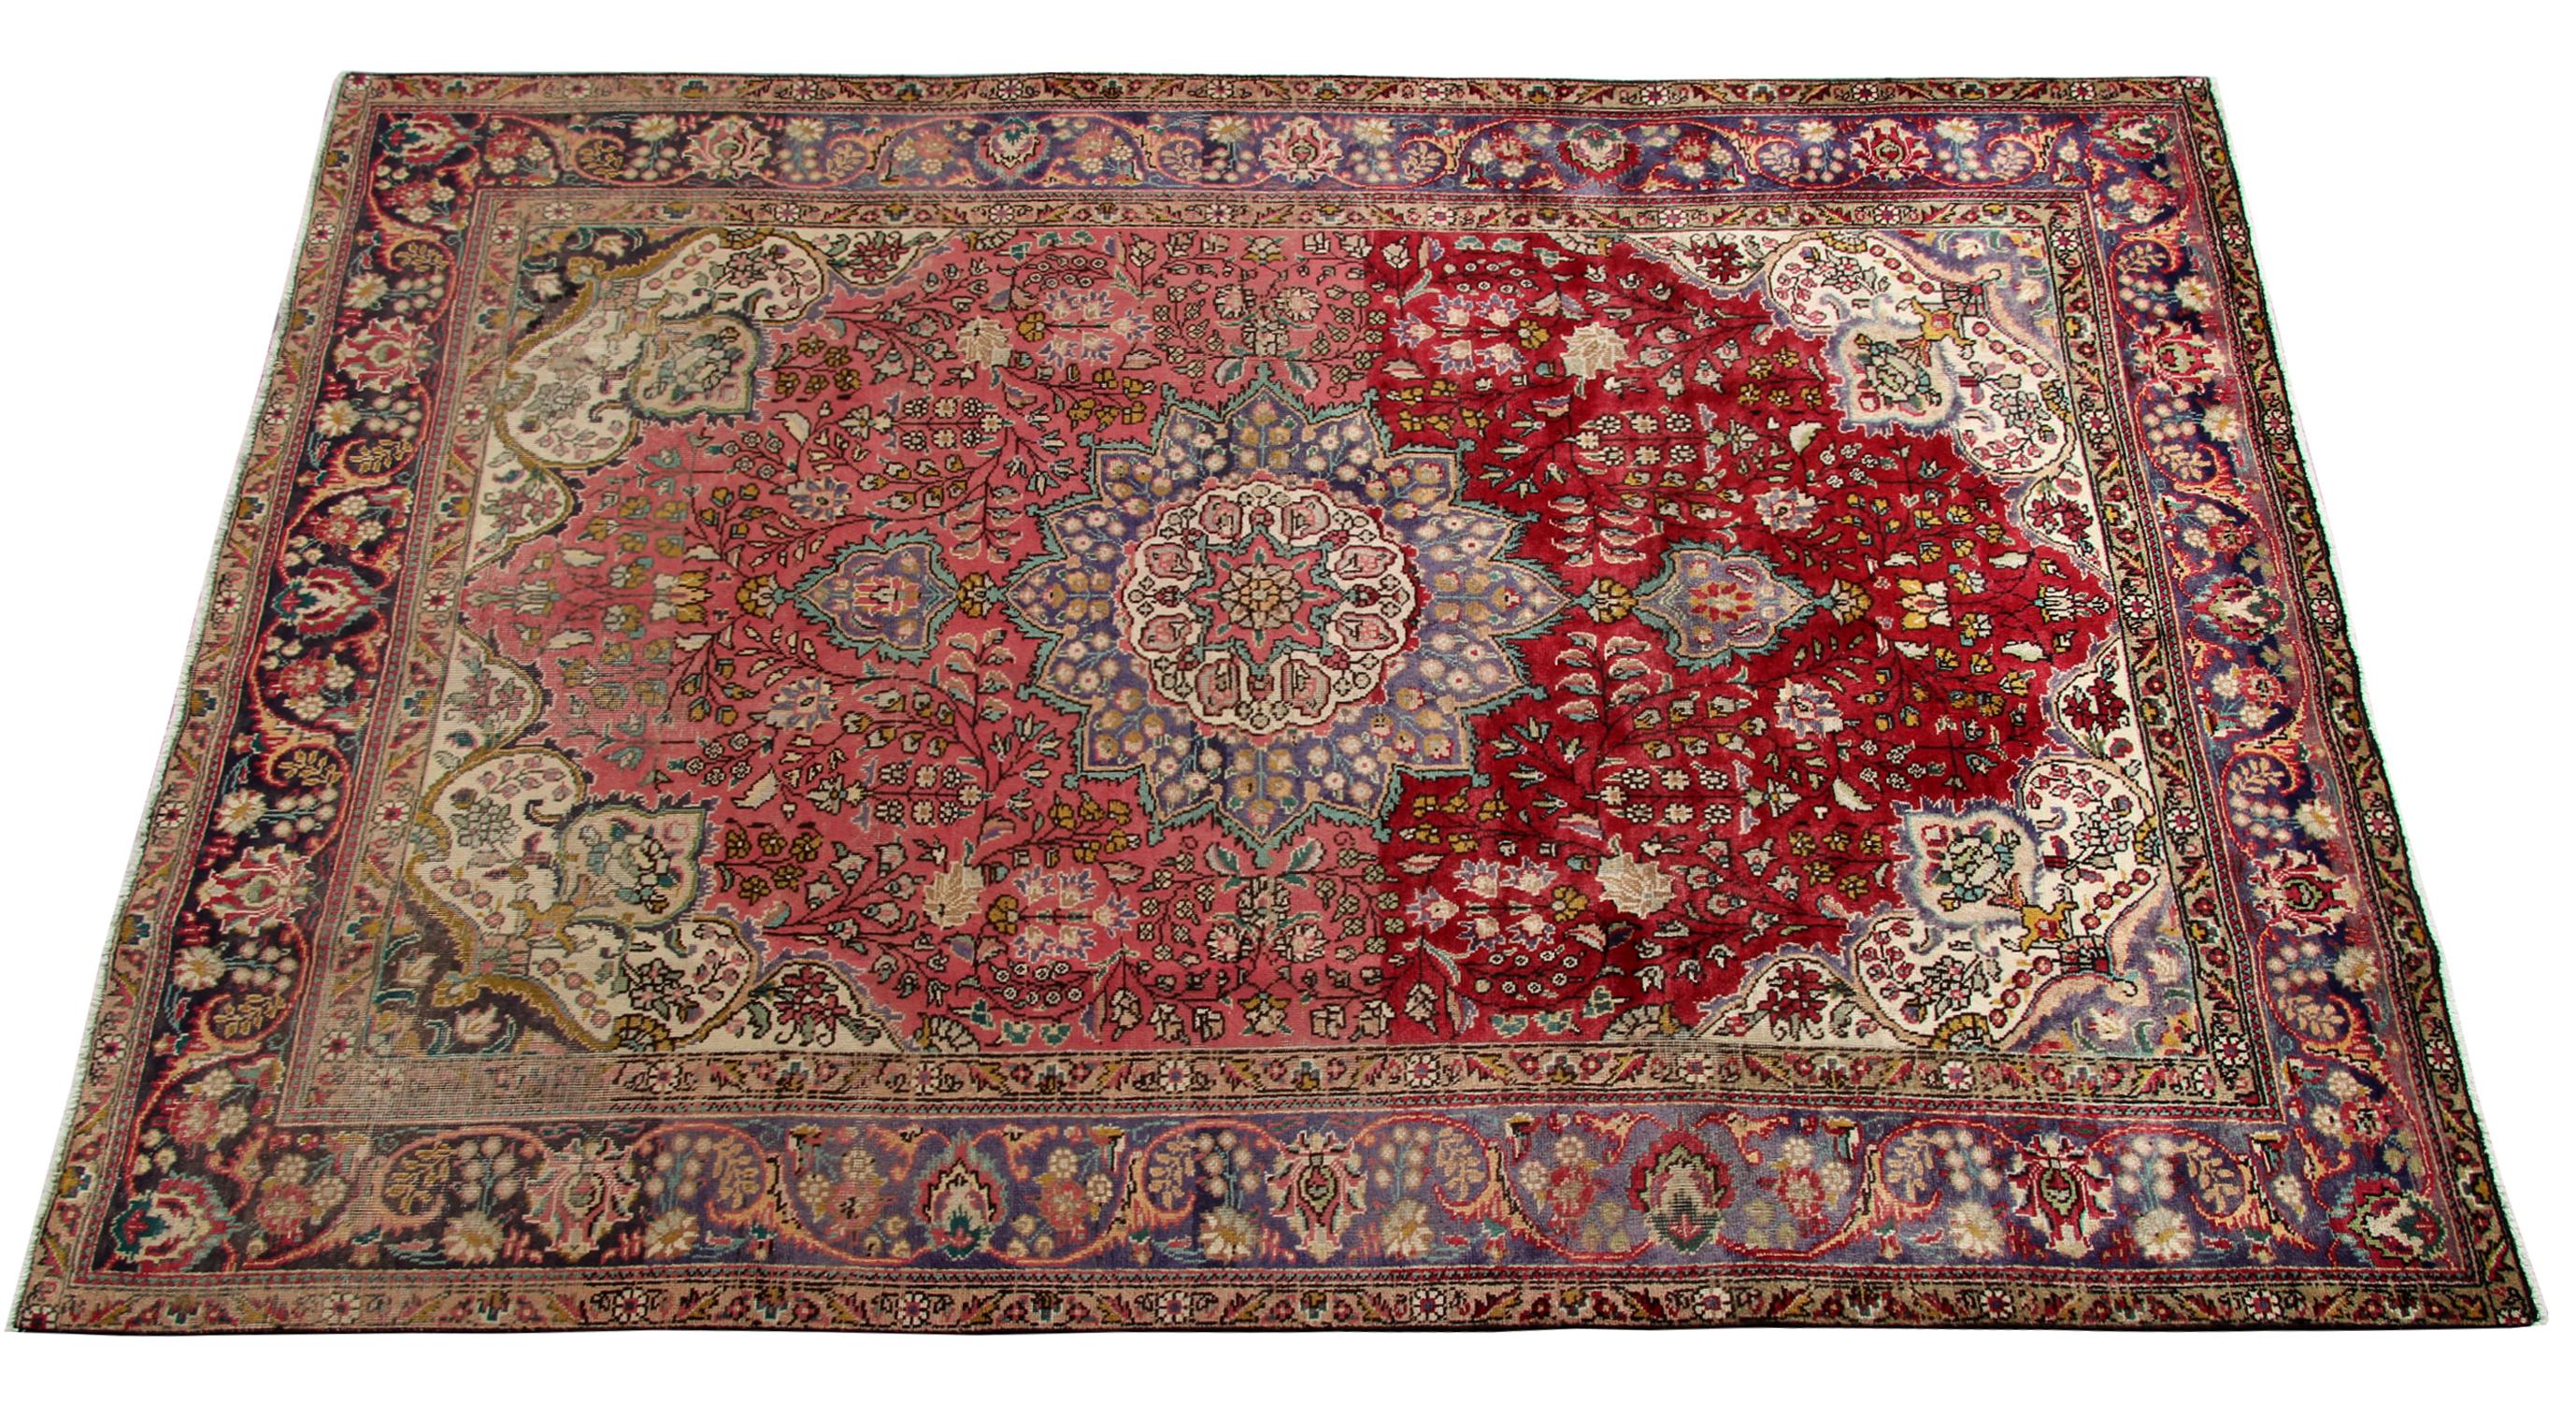 This beautiful wool rug is a fantastic example of rugs woven in the 1970s. It features a traditional elegant central medallion design. It is enclosed by a highly detailed surrounding design and border and woven in a fantastic array of accent